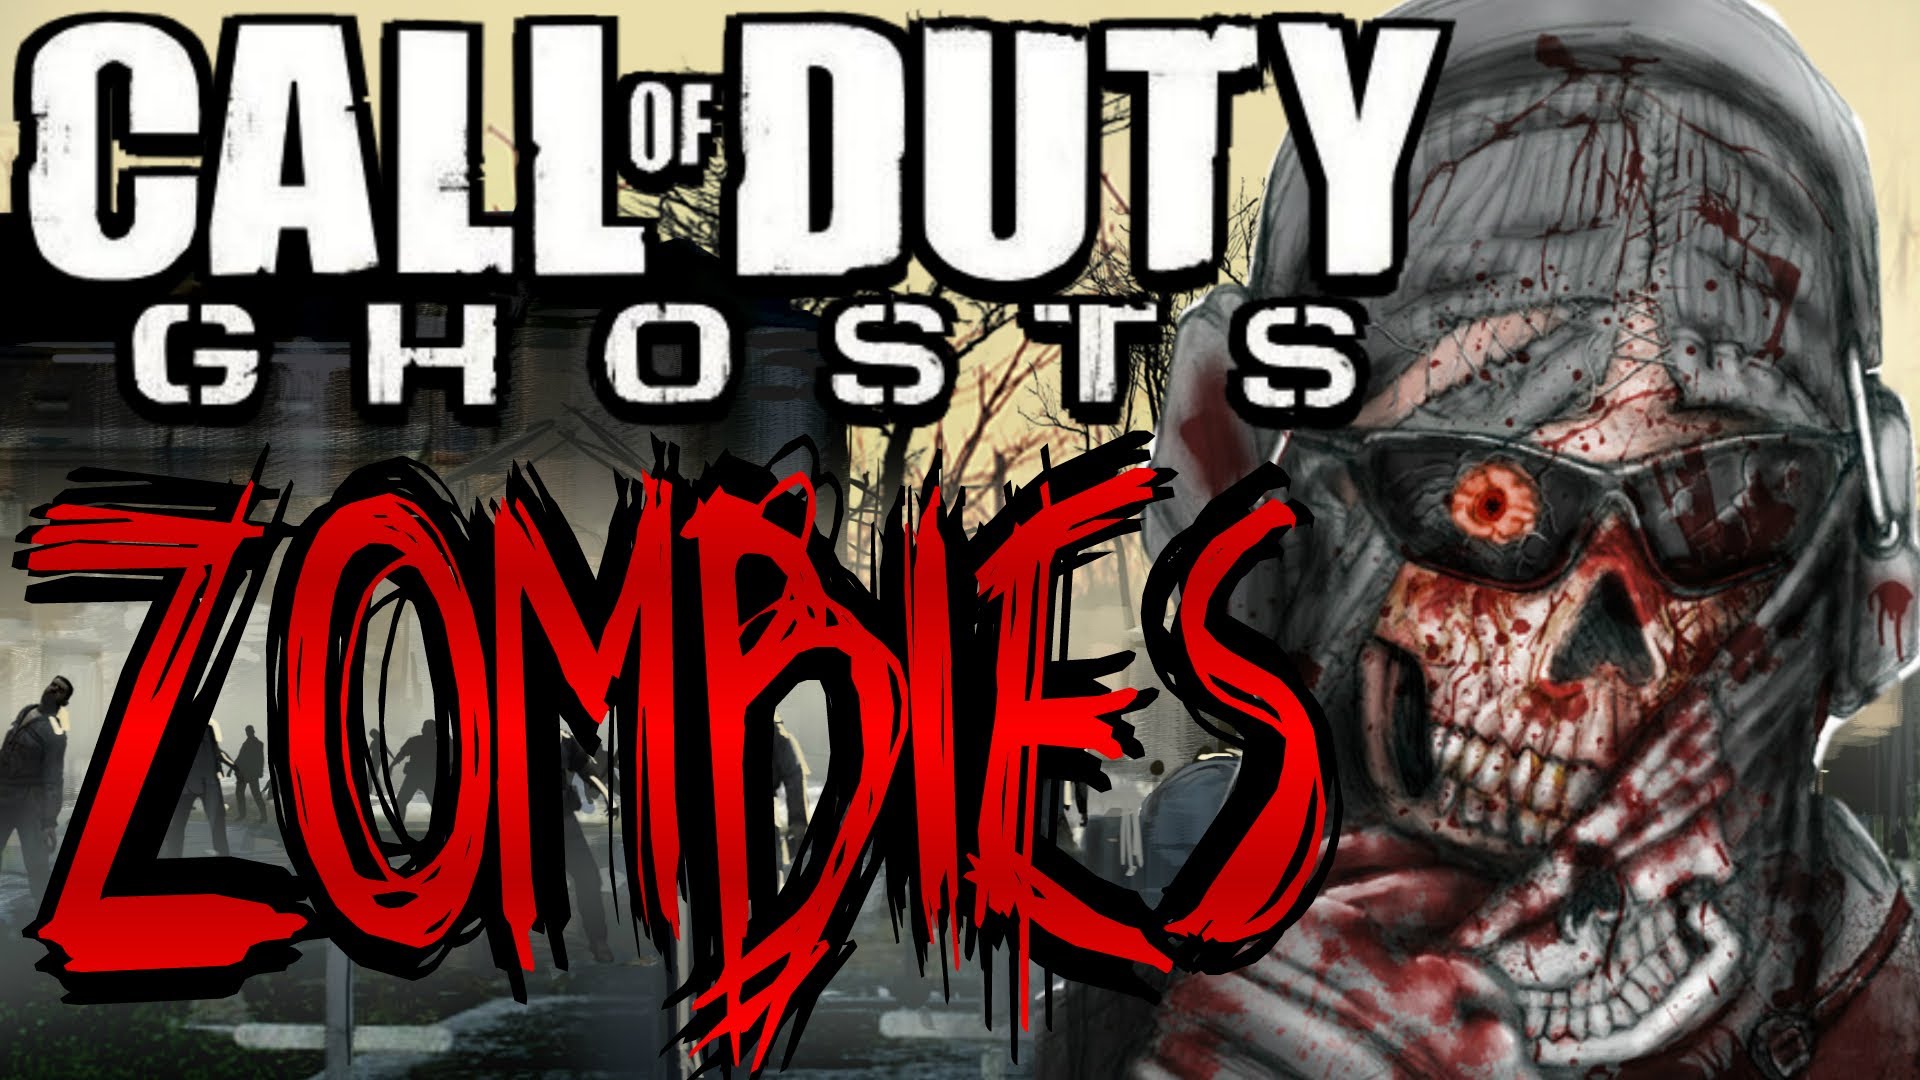 Call of Duty Ghosts: "Zombies" "New Game Mode"